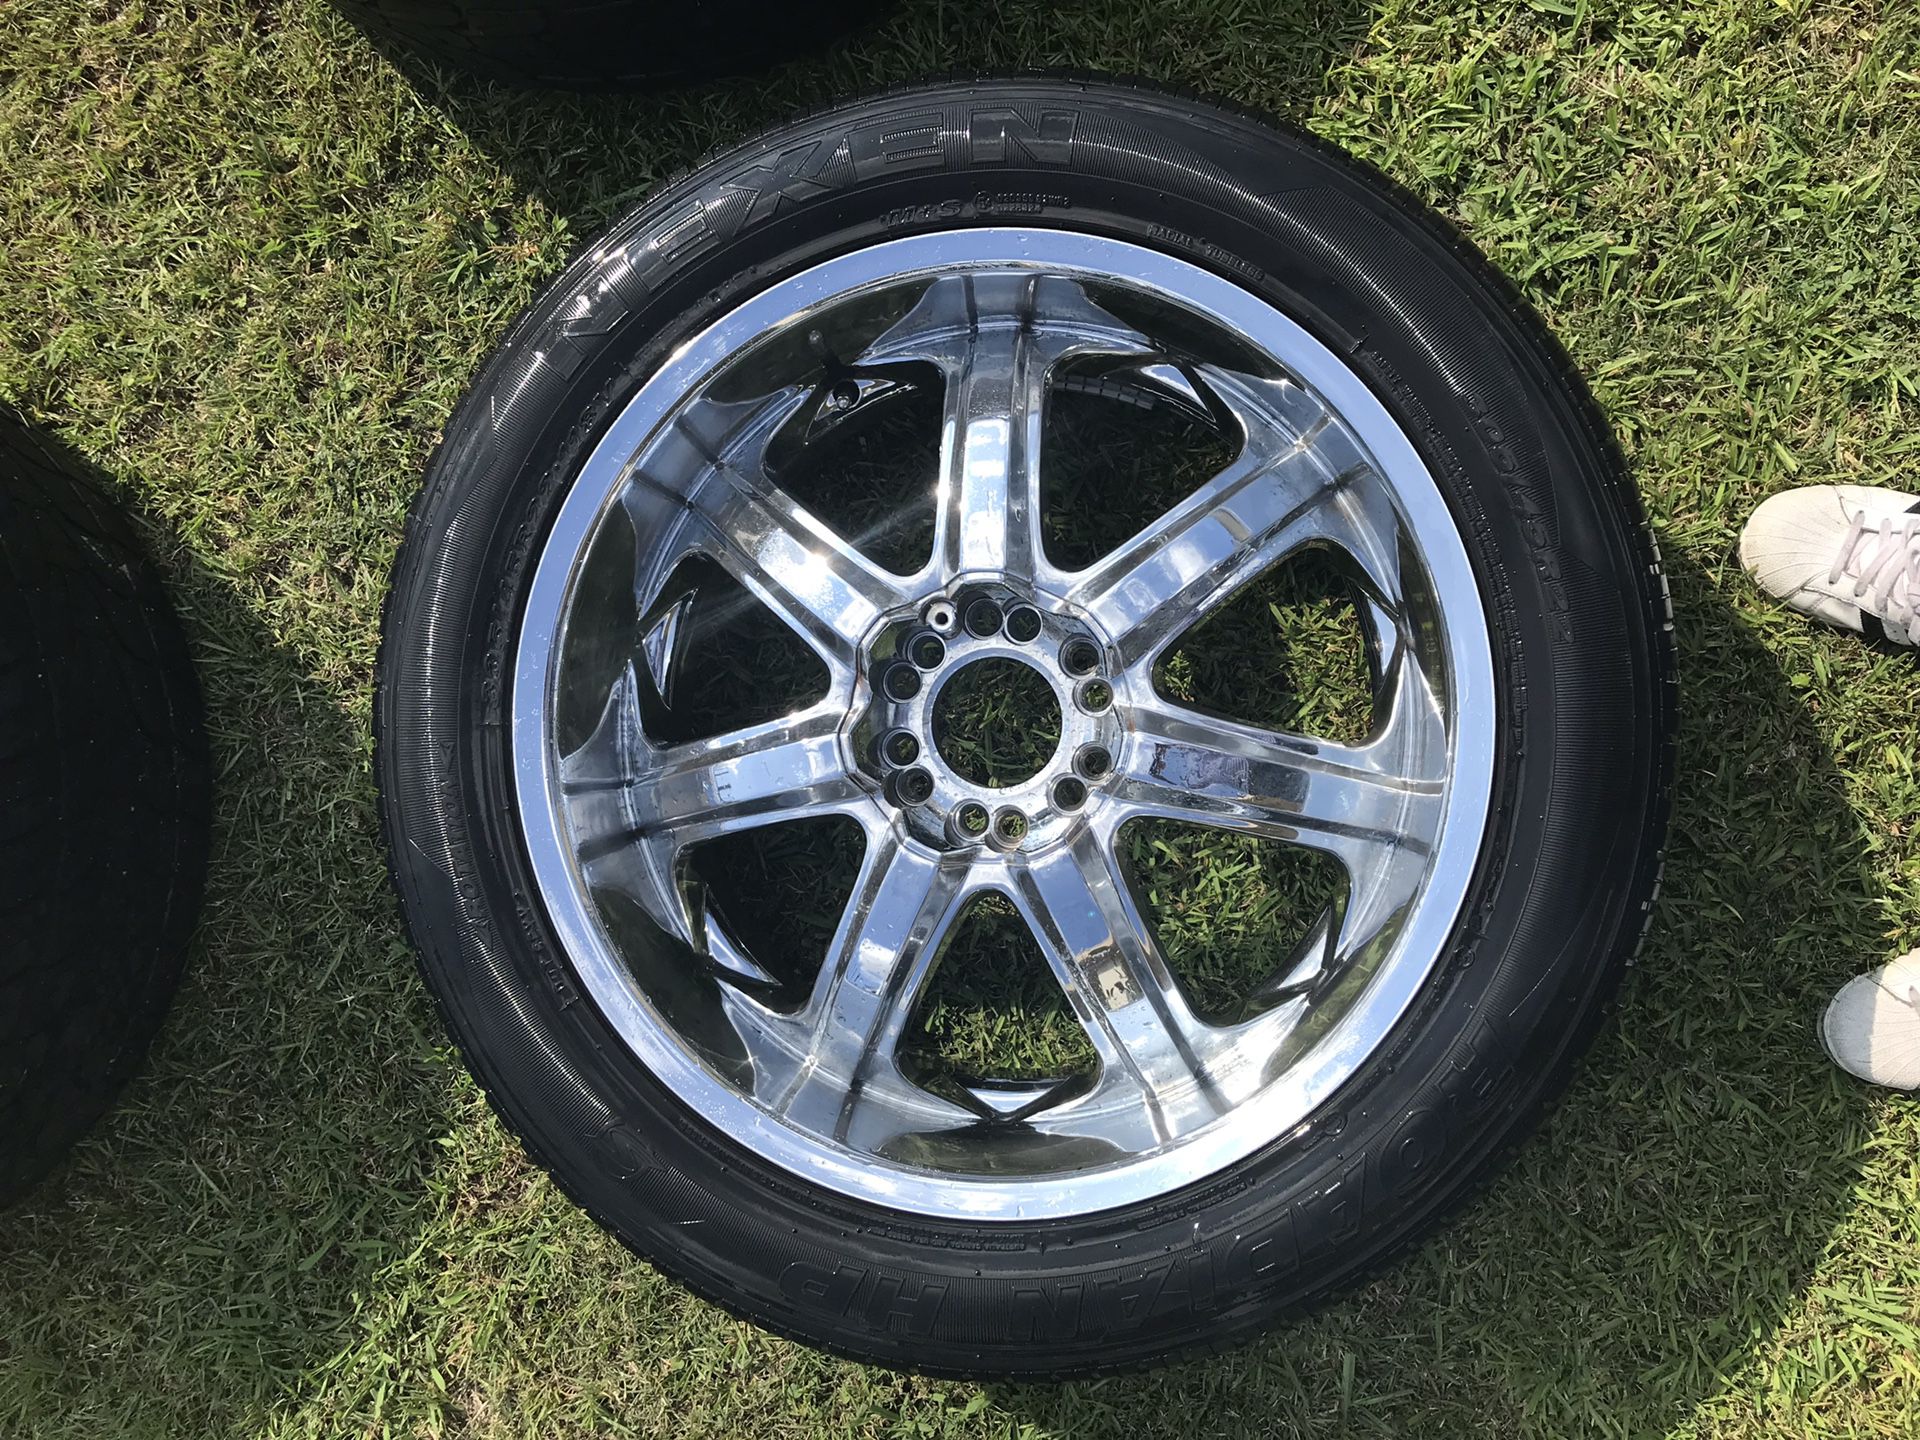 22”Chrome rims with tires